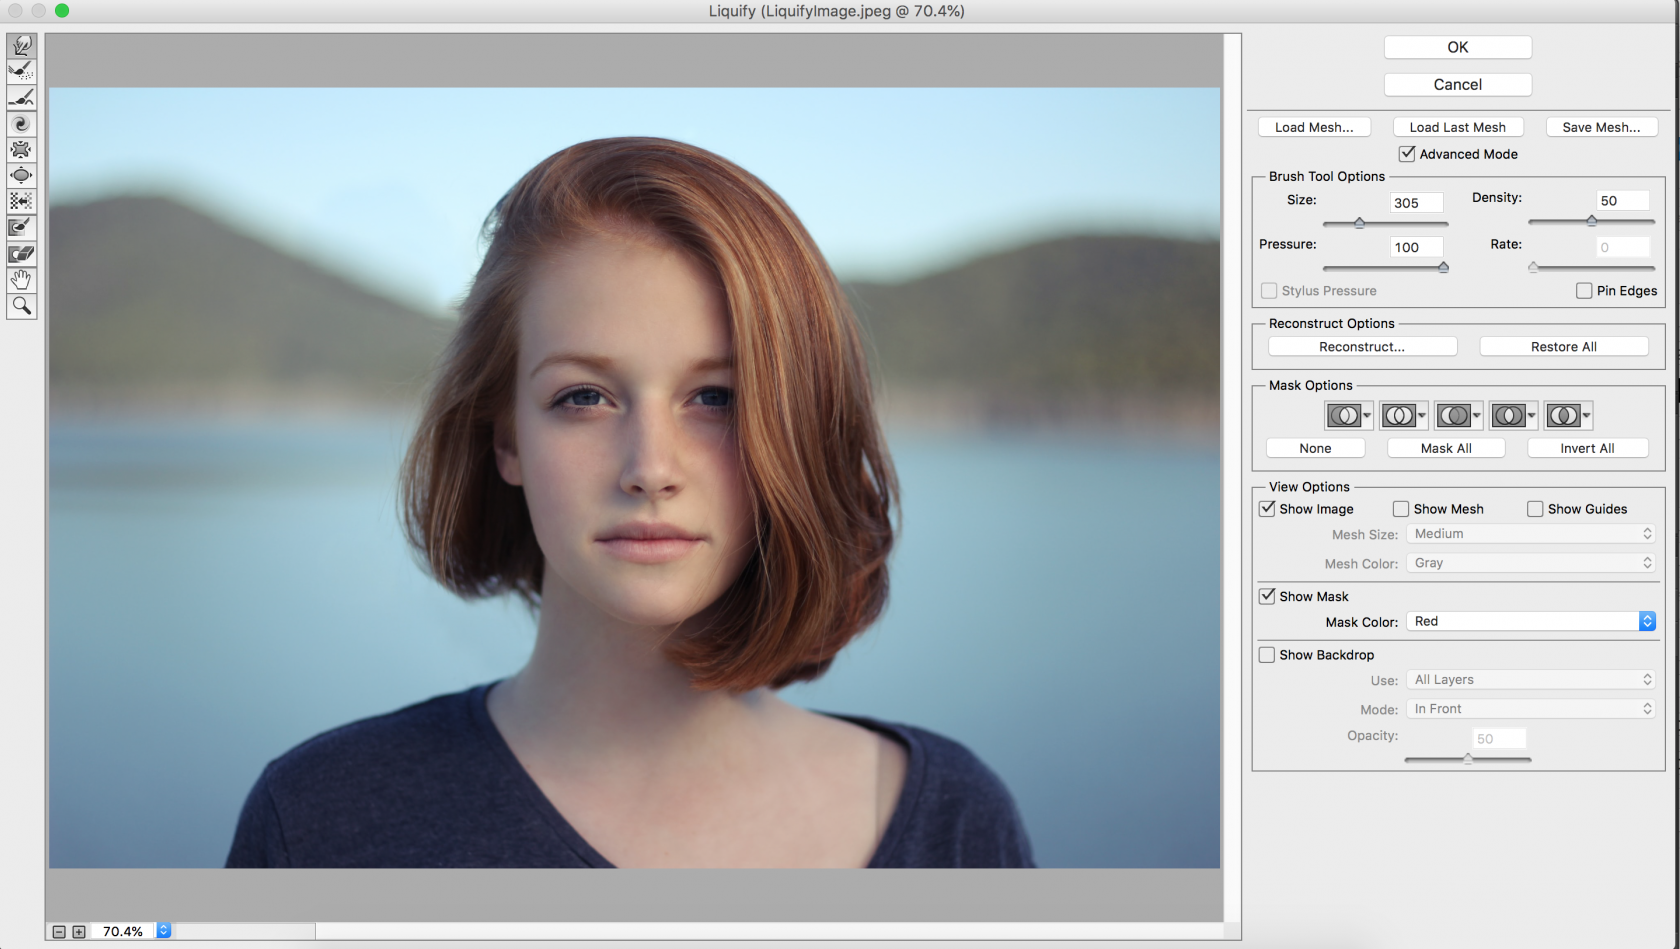 How to Use the Liquify Tool in Photoshop: Mastering the Basics Image6